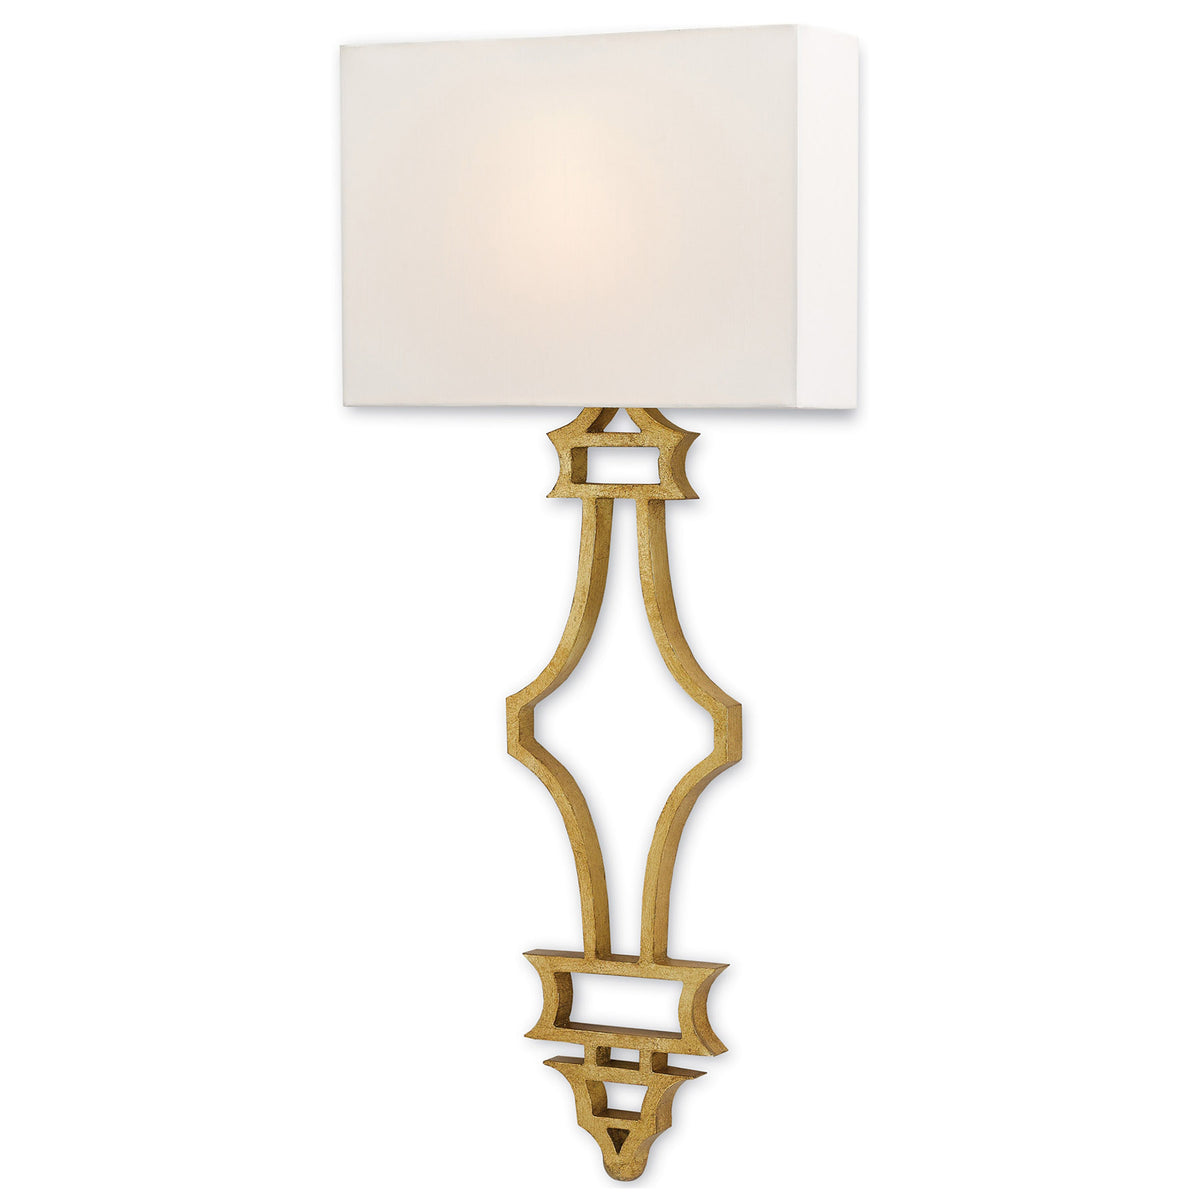 Eternity Gold Wall Sconce